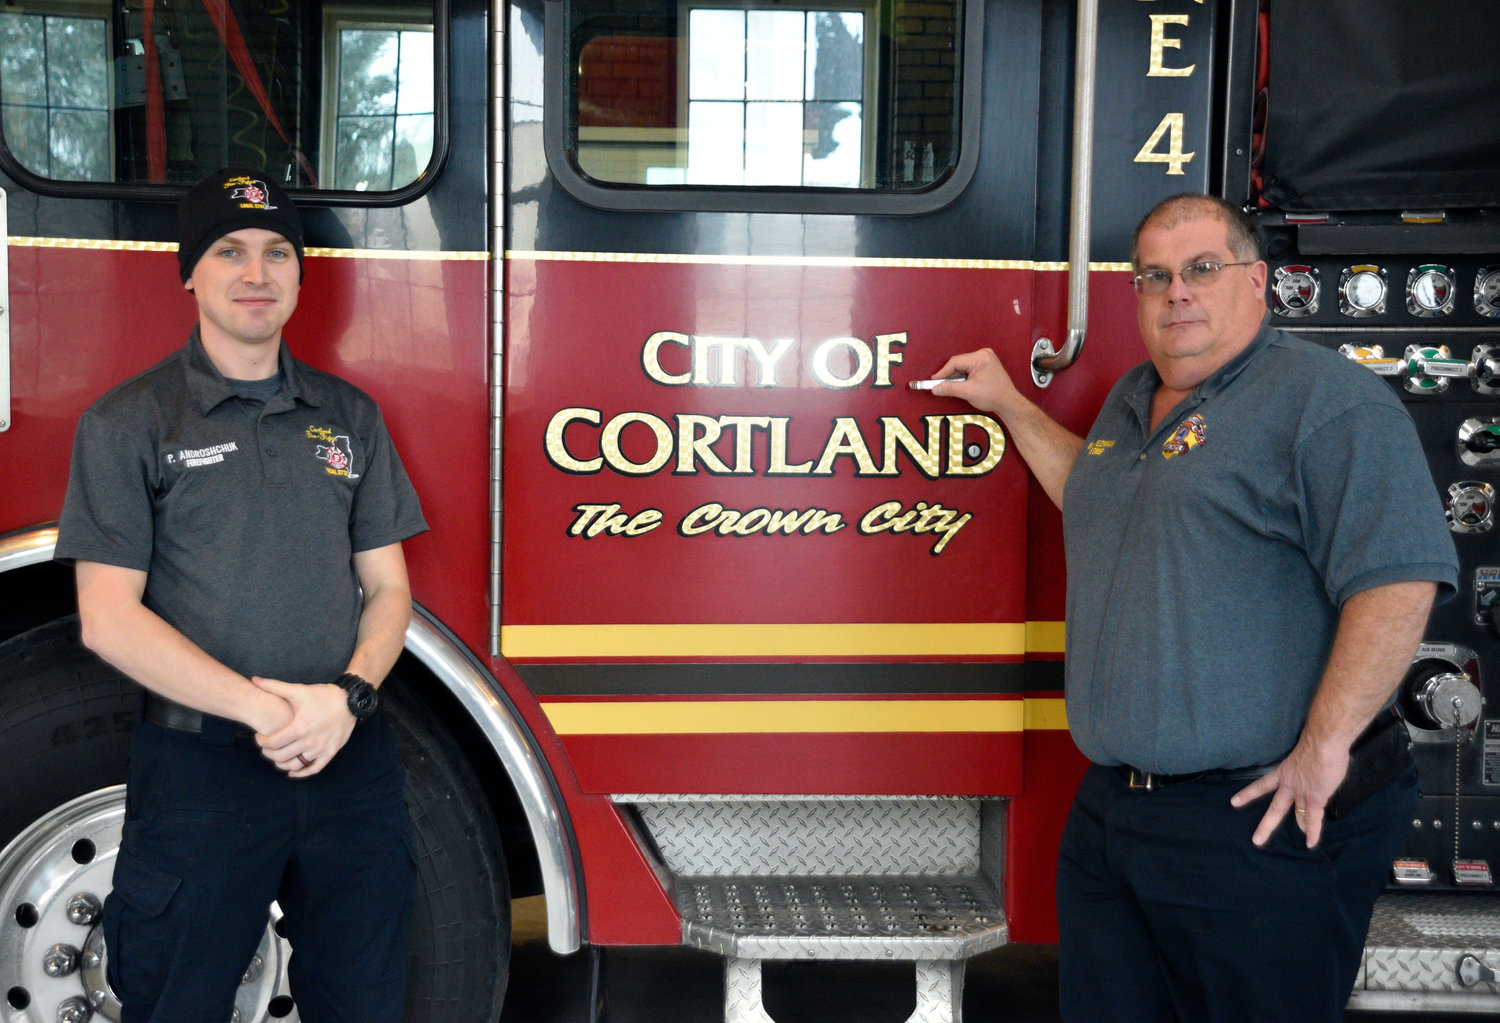 Cortland Firefighter Pavel Androshchuk, left, with the help of Fire Chief Wayne Friedman, right, along with Battalion Chief Derek Reynolds, the Cortland Ukrainian Pentecostal Church and many others — with approval from Cortland’s Common Council — has shipped more than 200 sets of protective gear to Ukraine, which has been seen on the frontlines, and in some of the areas of heaviest conflict in the country.